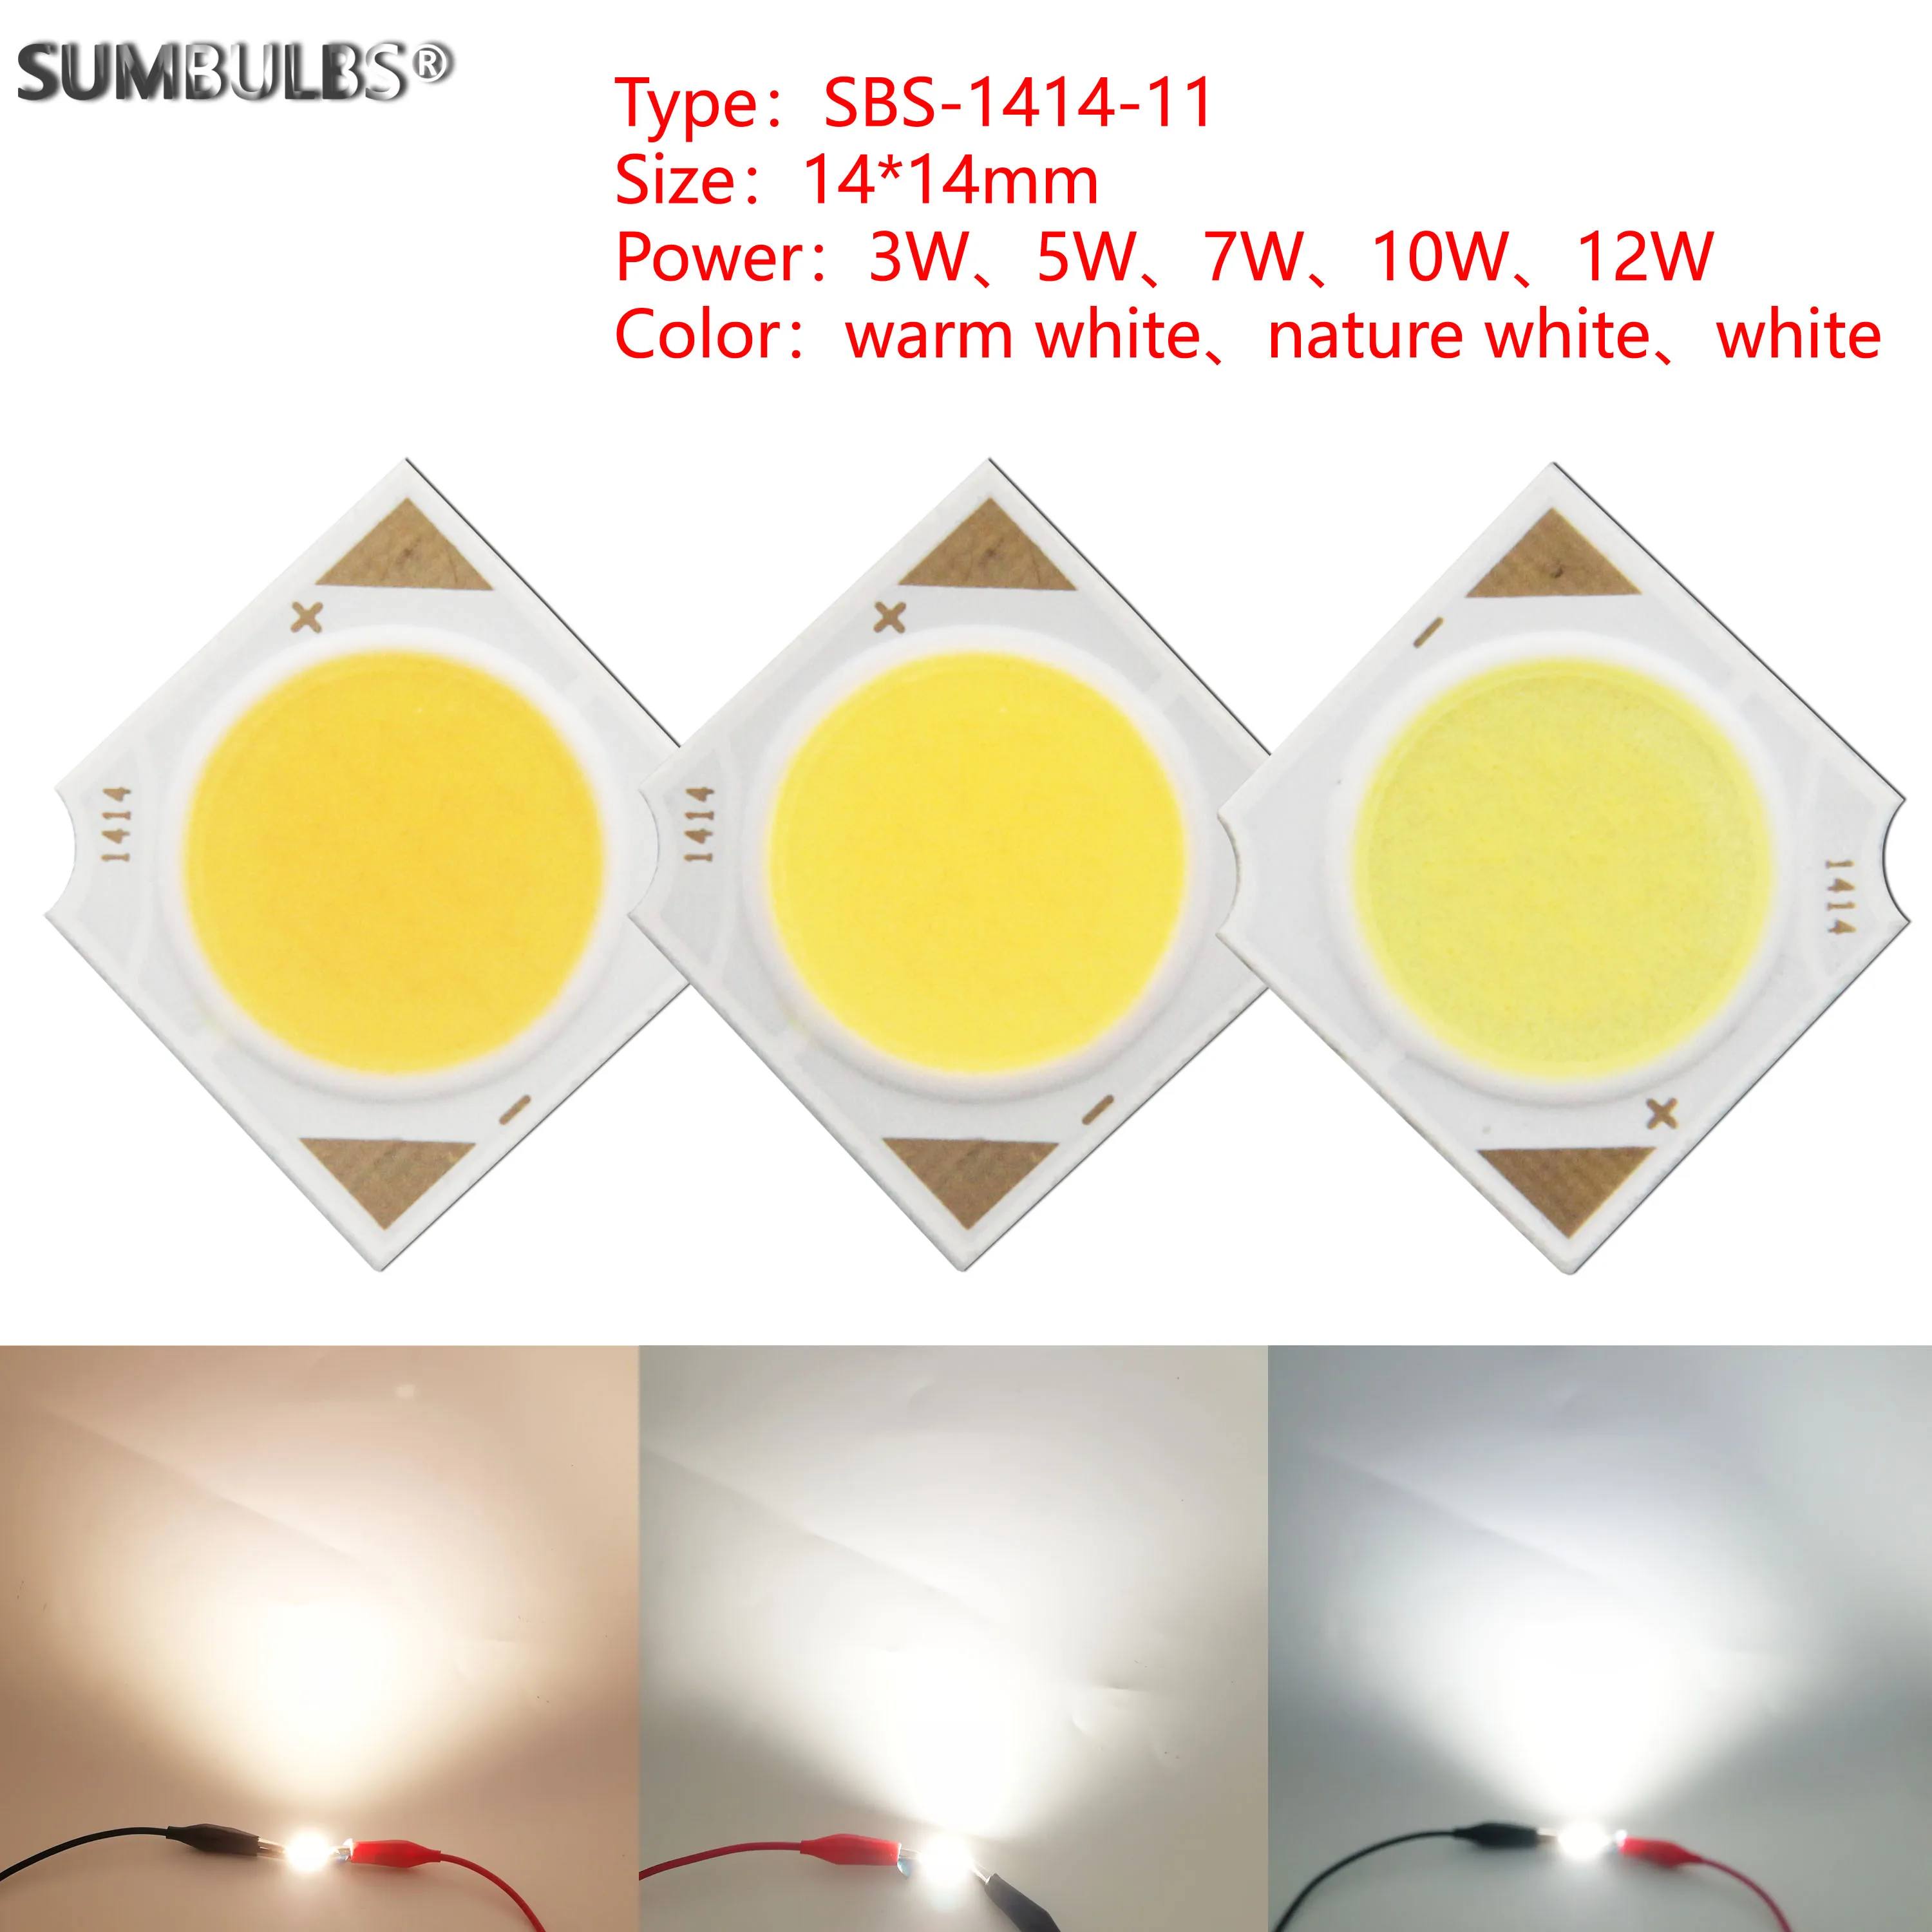 

SUMBULBS 3W 5W 7W 10W 12W 14x14mm LED COB Light Source Epistar Chips Cold Warm Natural White for Spotlight Indoor Lamp